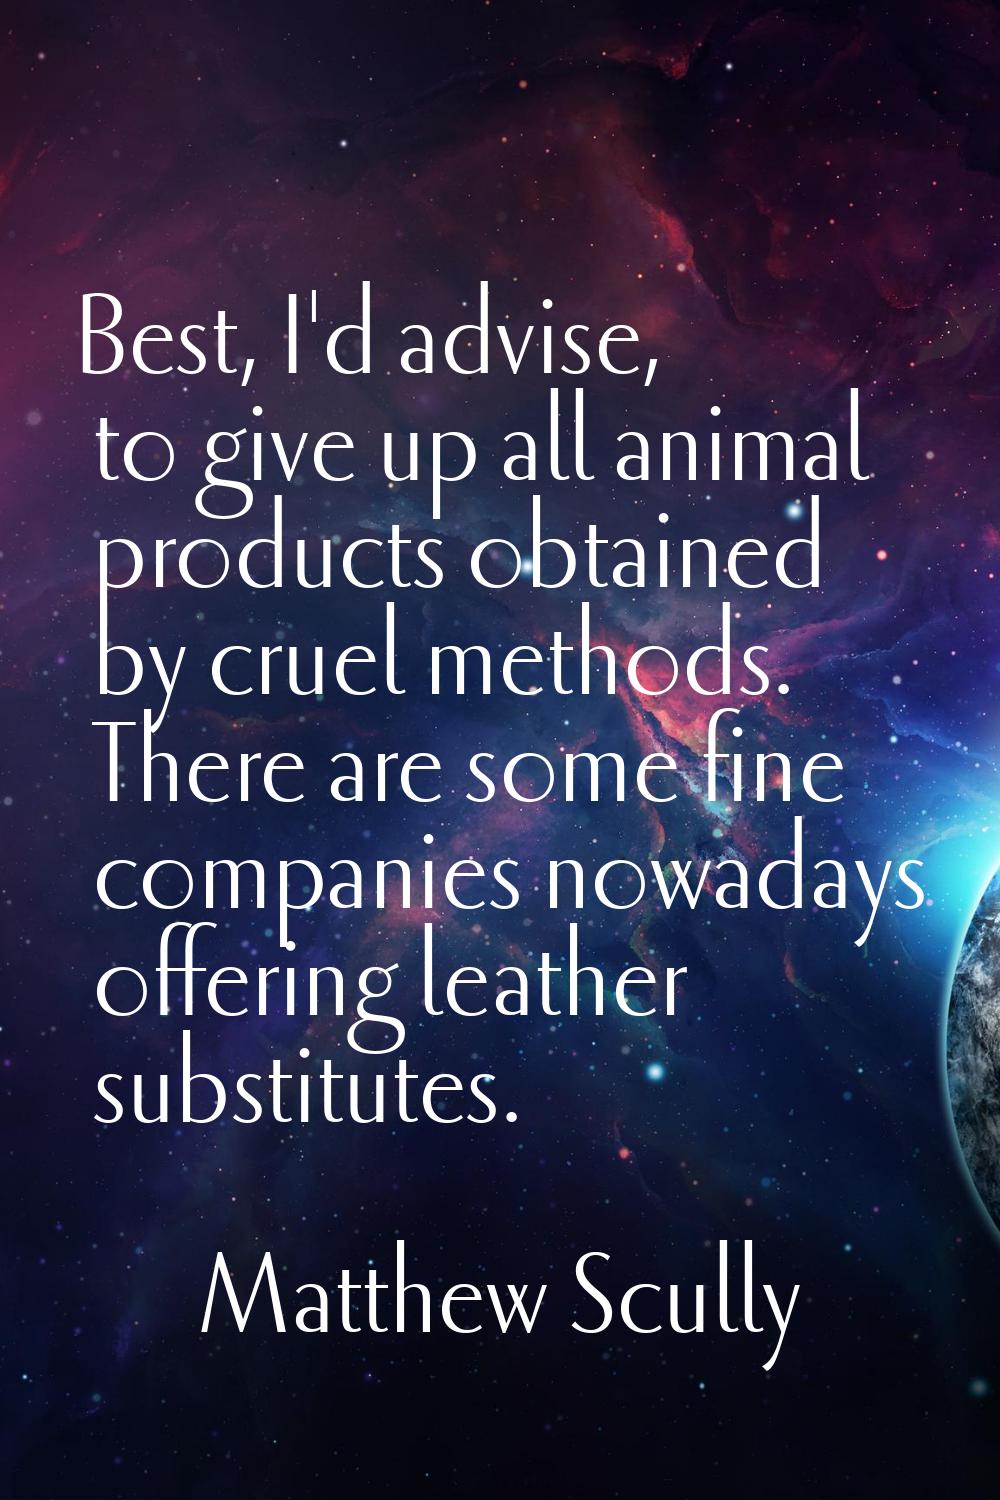 Best, I'd advise, to give up all animal products obtained by cruel methods. There are some fine com